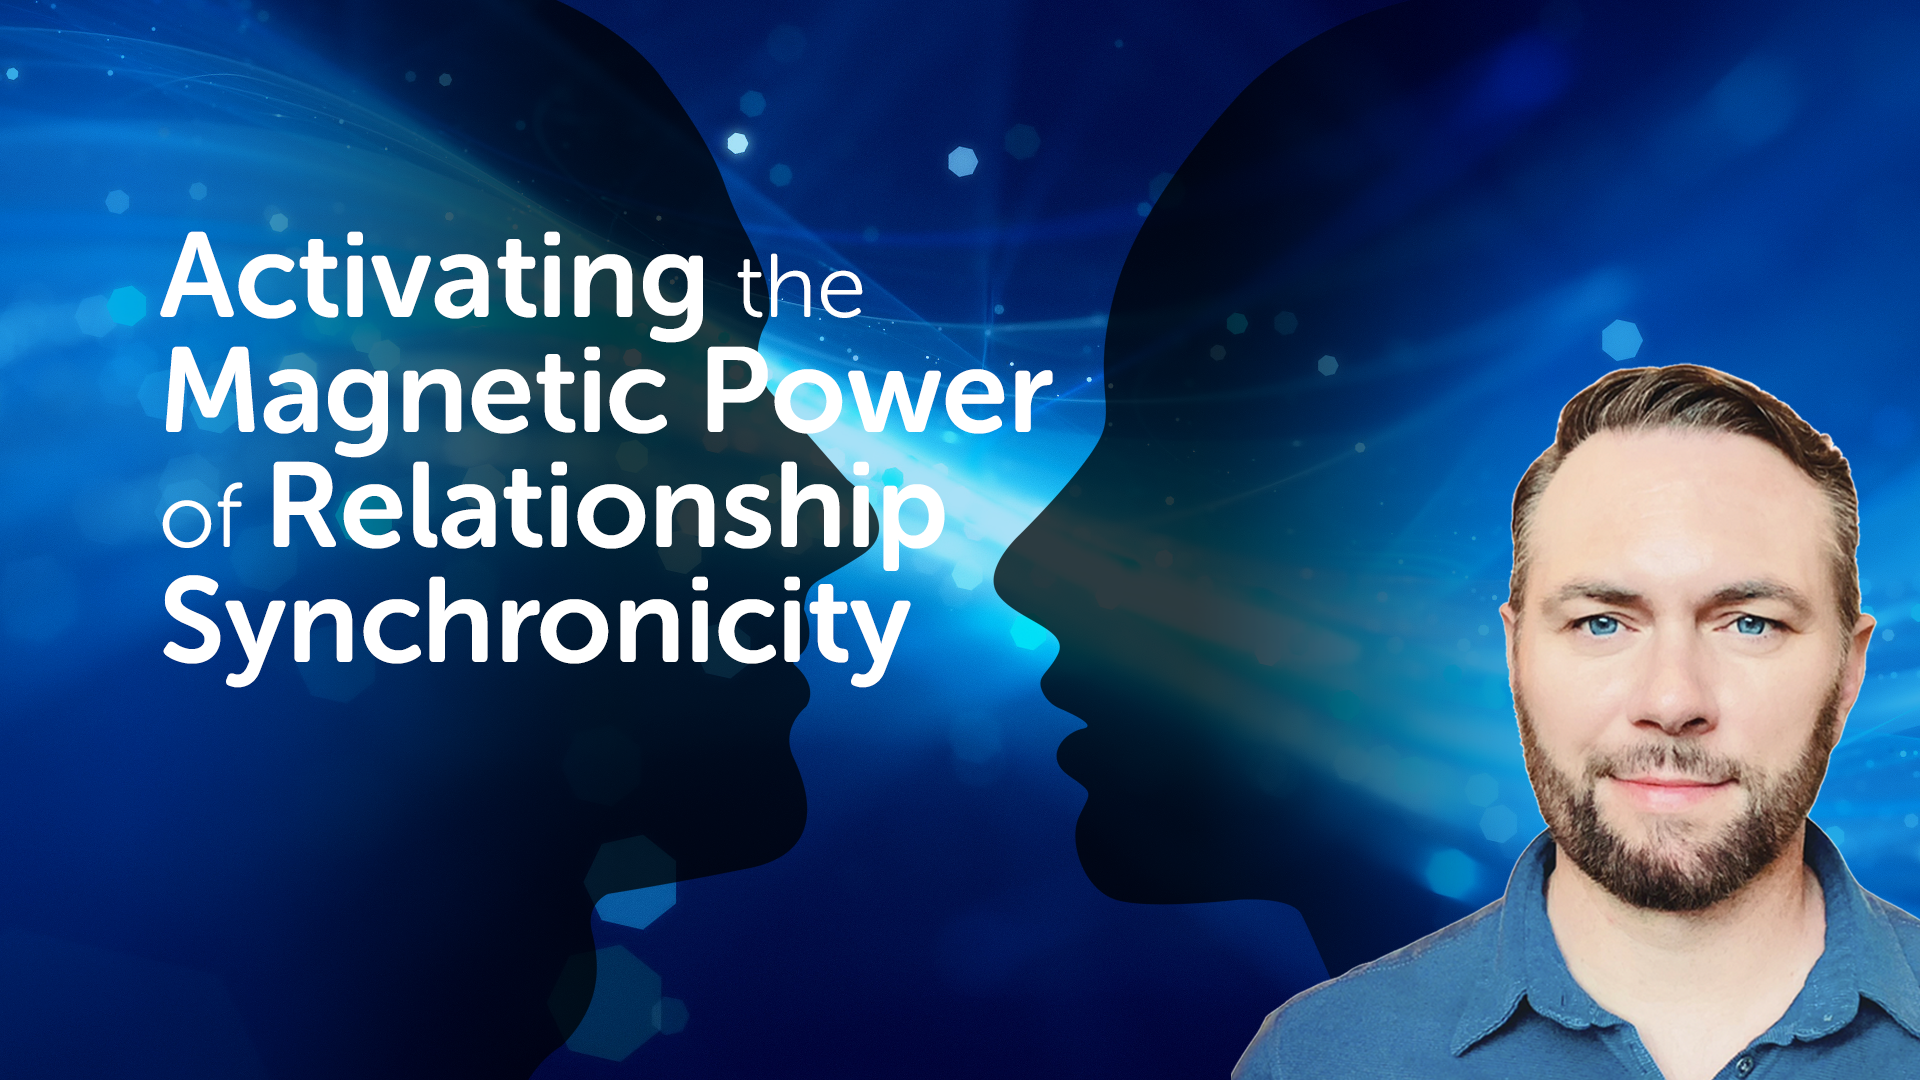 Video – Activating the Magnetic Power of Relationship Synchronicity